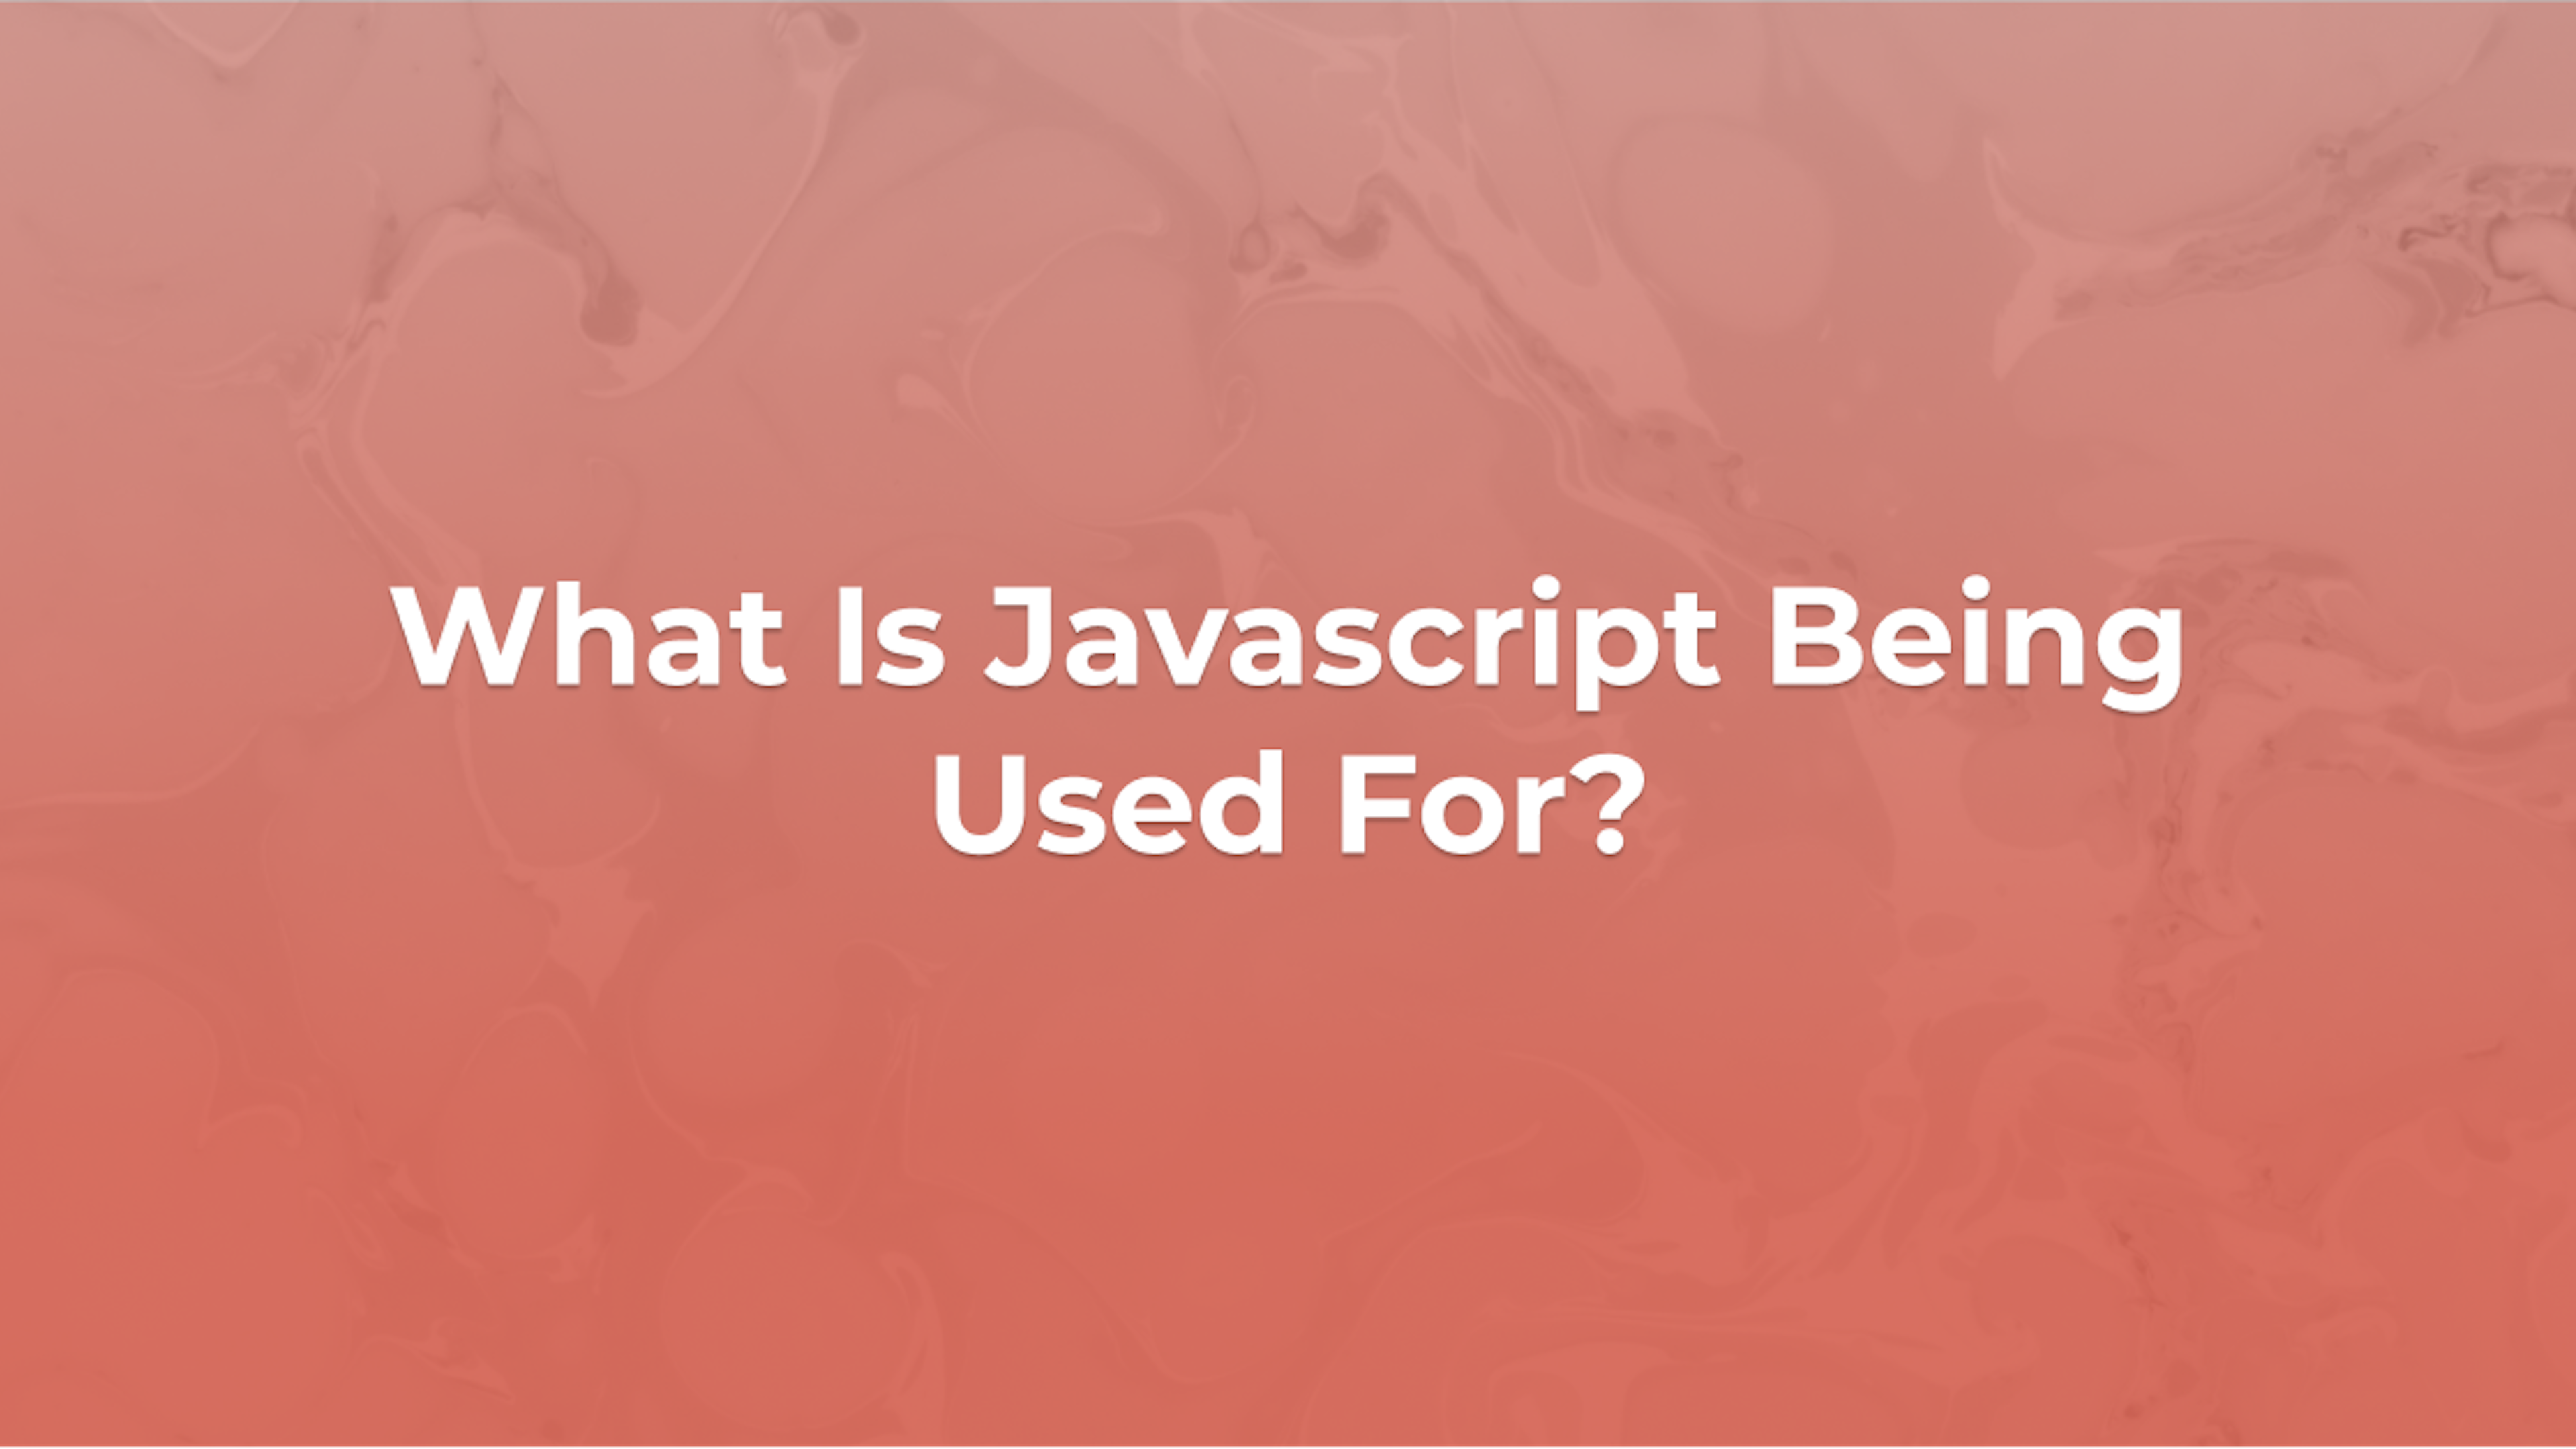 What Is Javascript Being Used For?